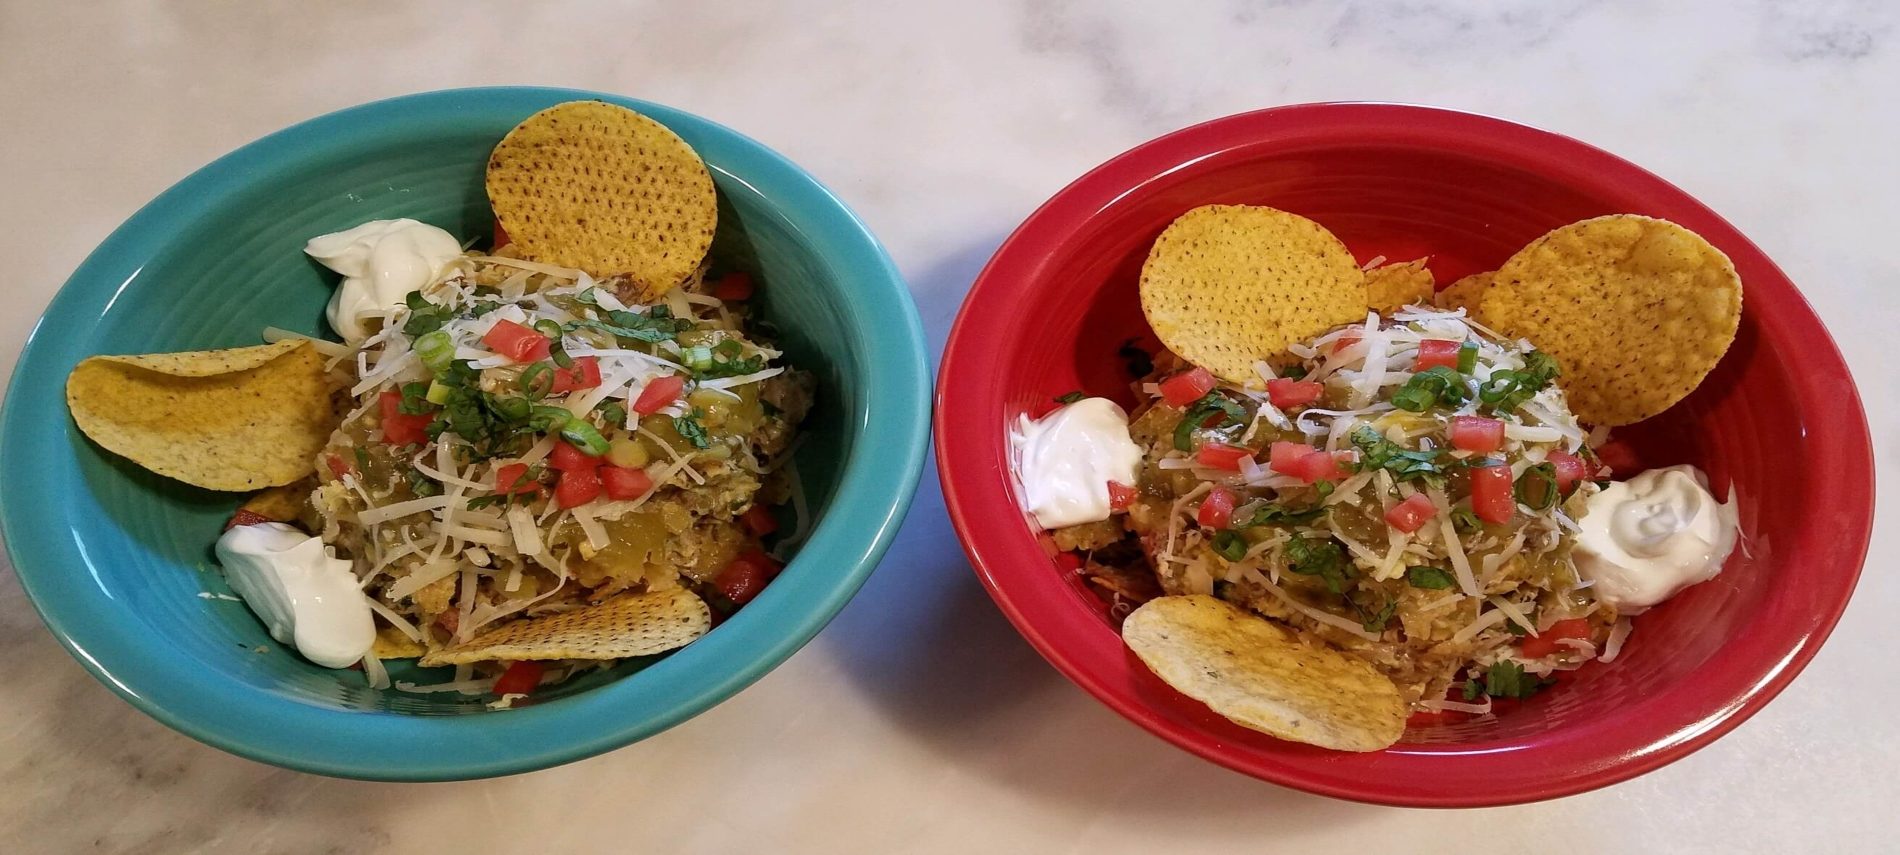 red and turquoise bowls with egg and pork mixture in center with tortilla chips, sour cream, dice tomatoes and green onions